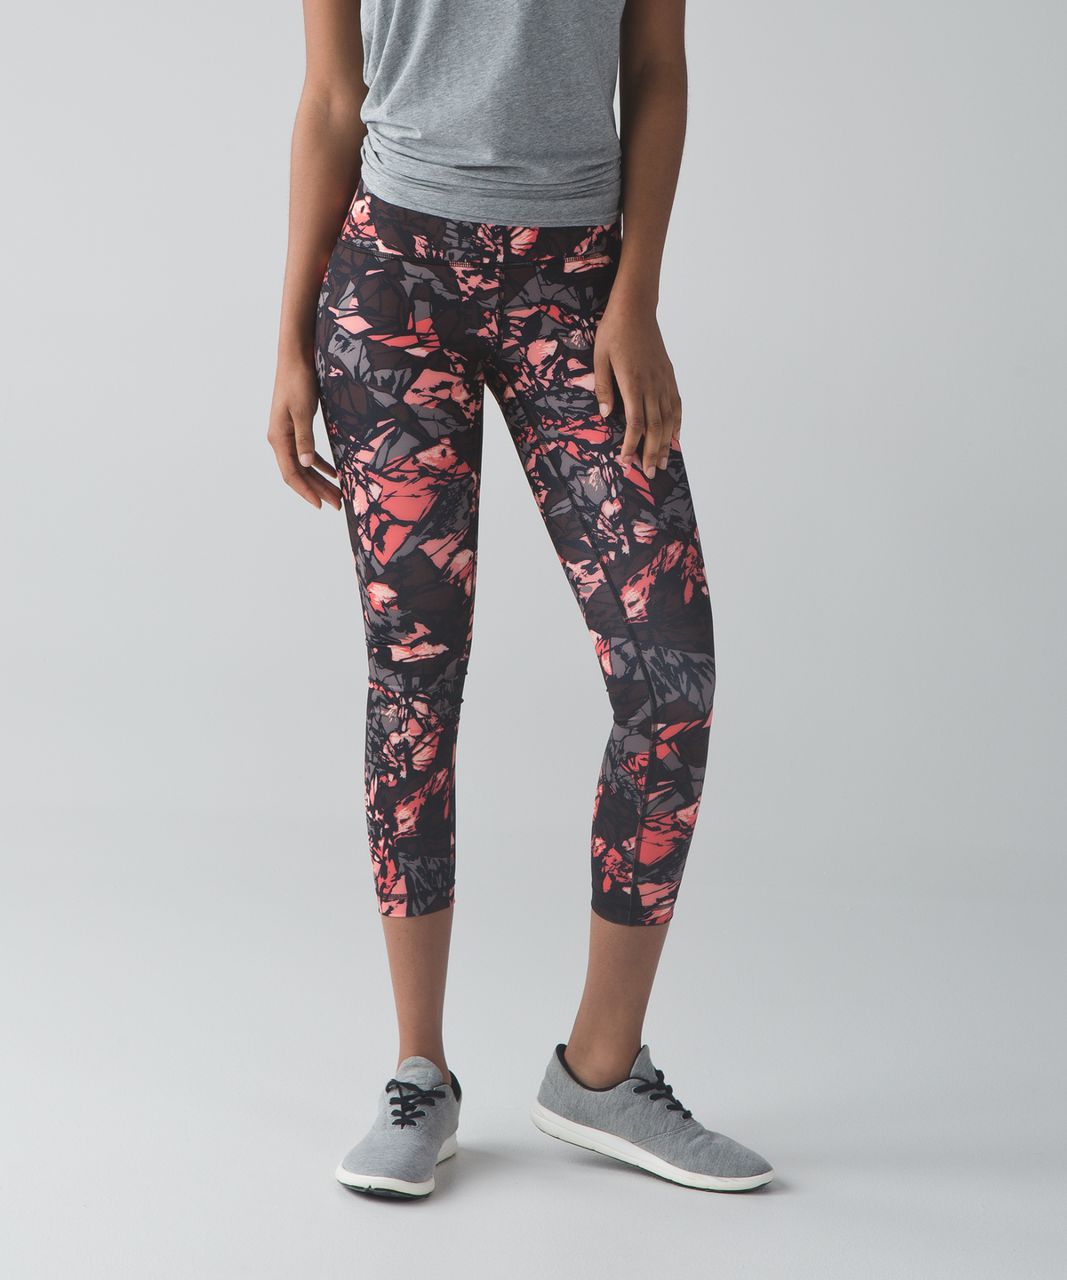 Lululemon High Times Pant (Full-On Luxtreme) - Paint Storm